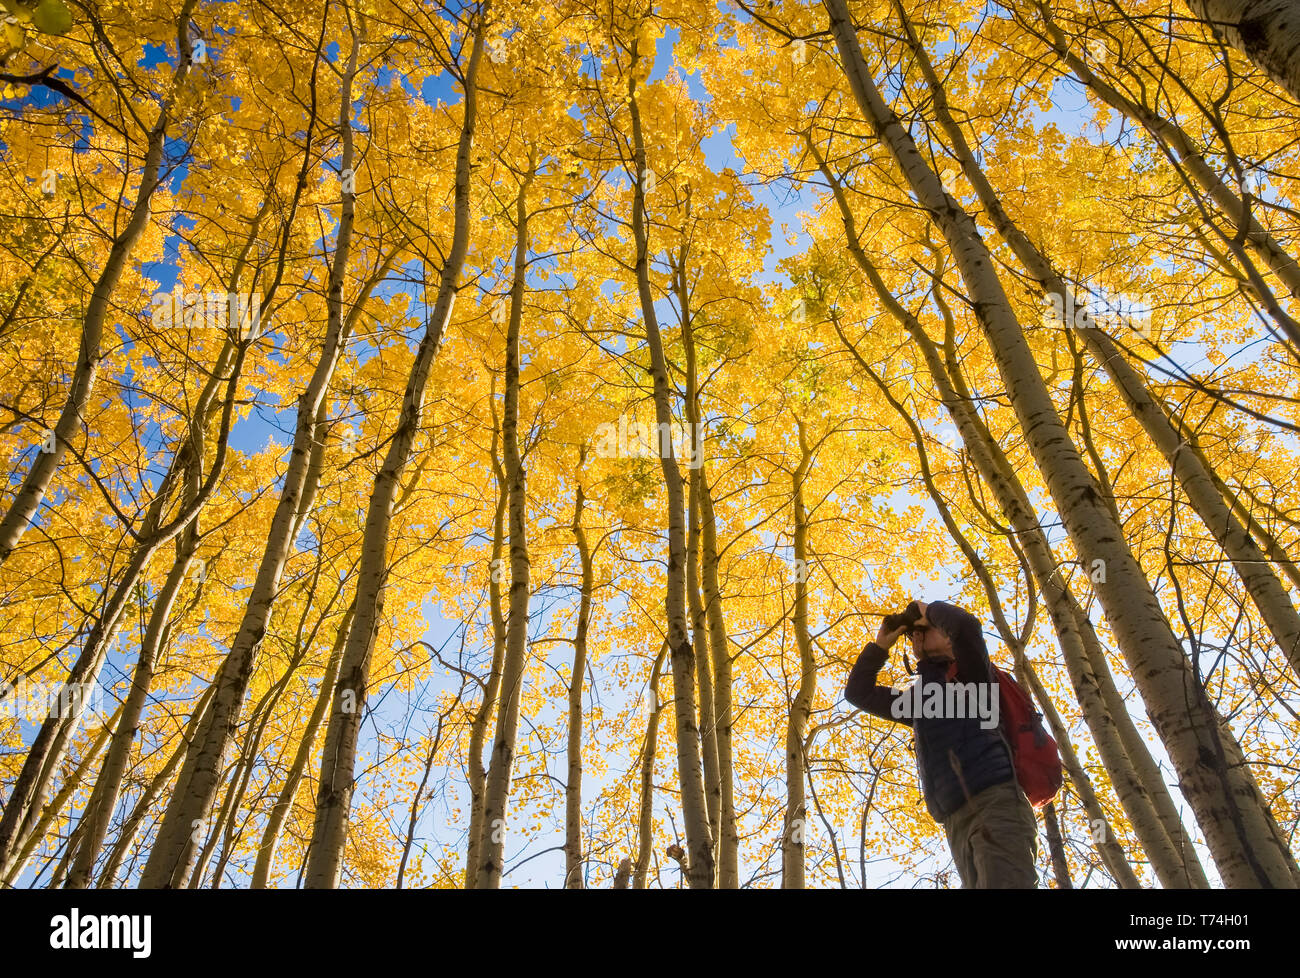 Hiker bird watching in autumn with golden foliage on the aspen trees, Birds Hill Provincial Park; Manitoba, Canada Stock Photo